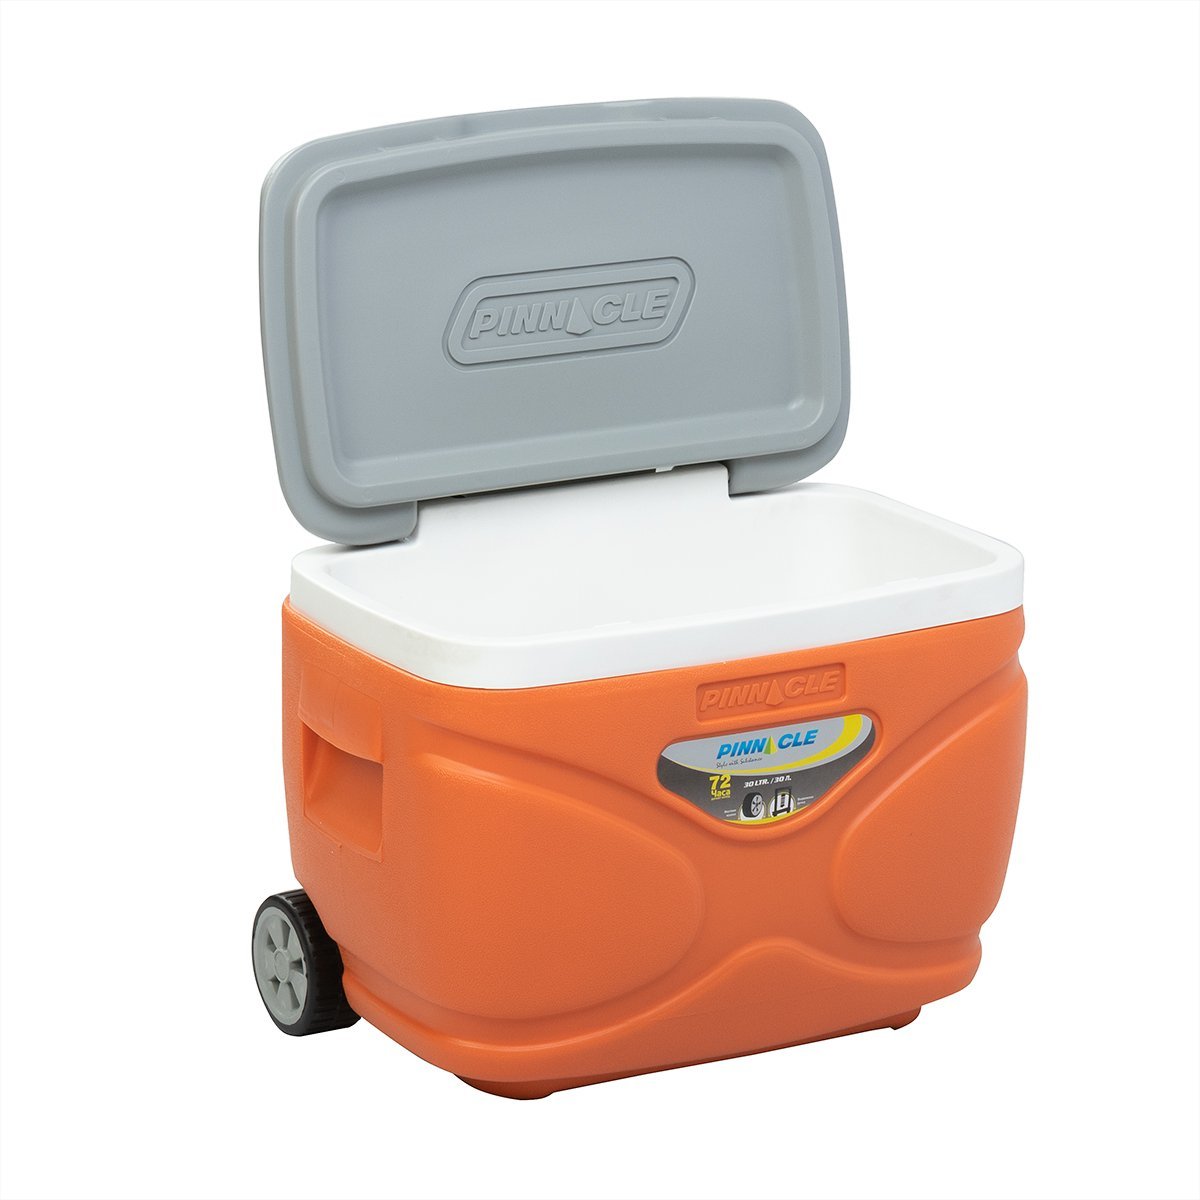 Prudence Wheeling Ice Chest with Retractable Handle, 31 qt, Orange with a lid widely open